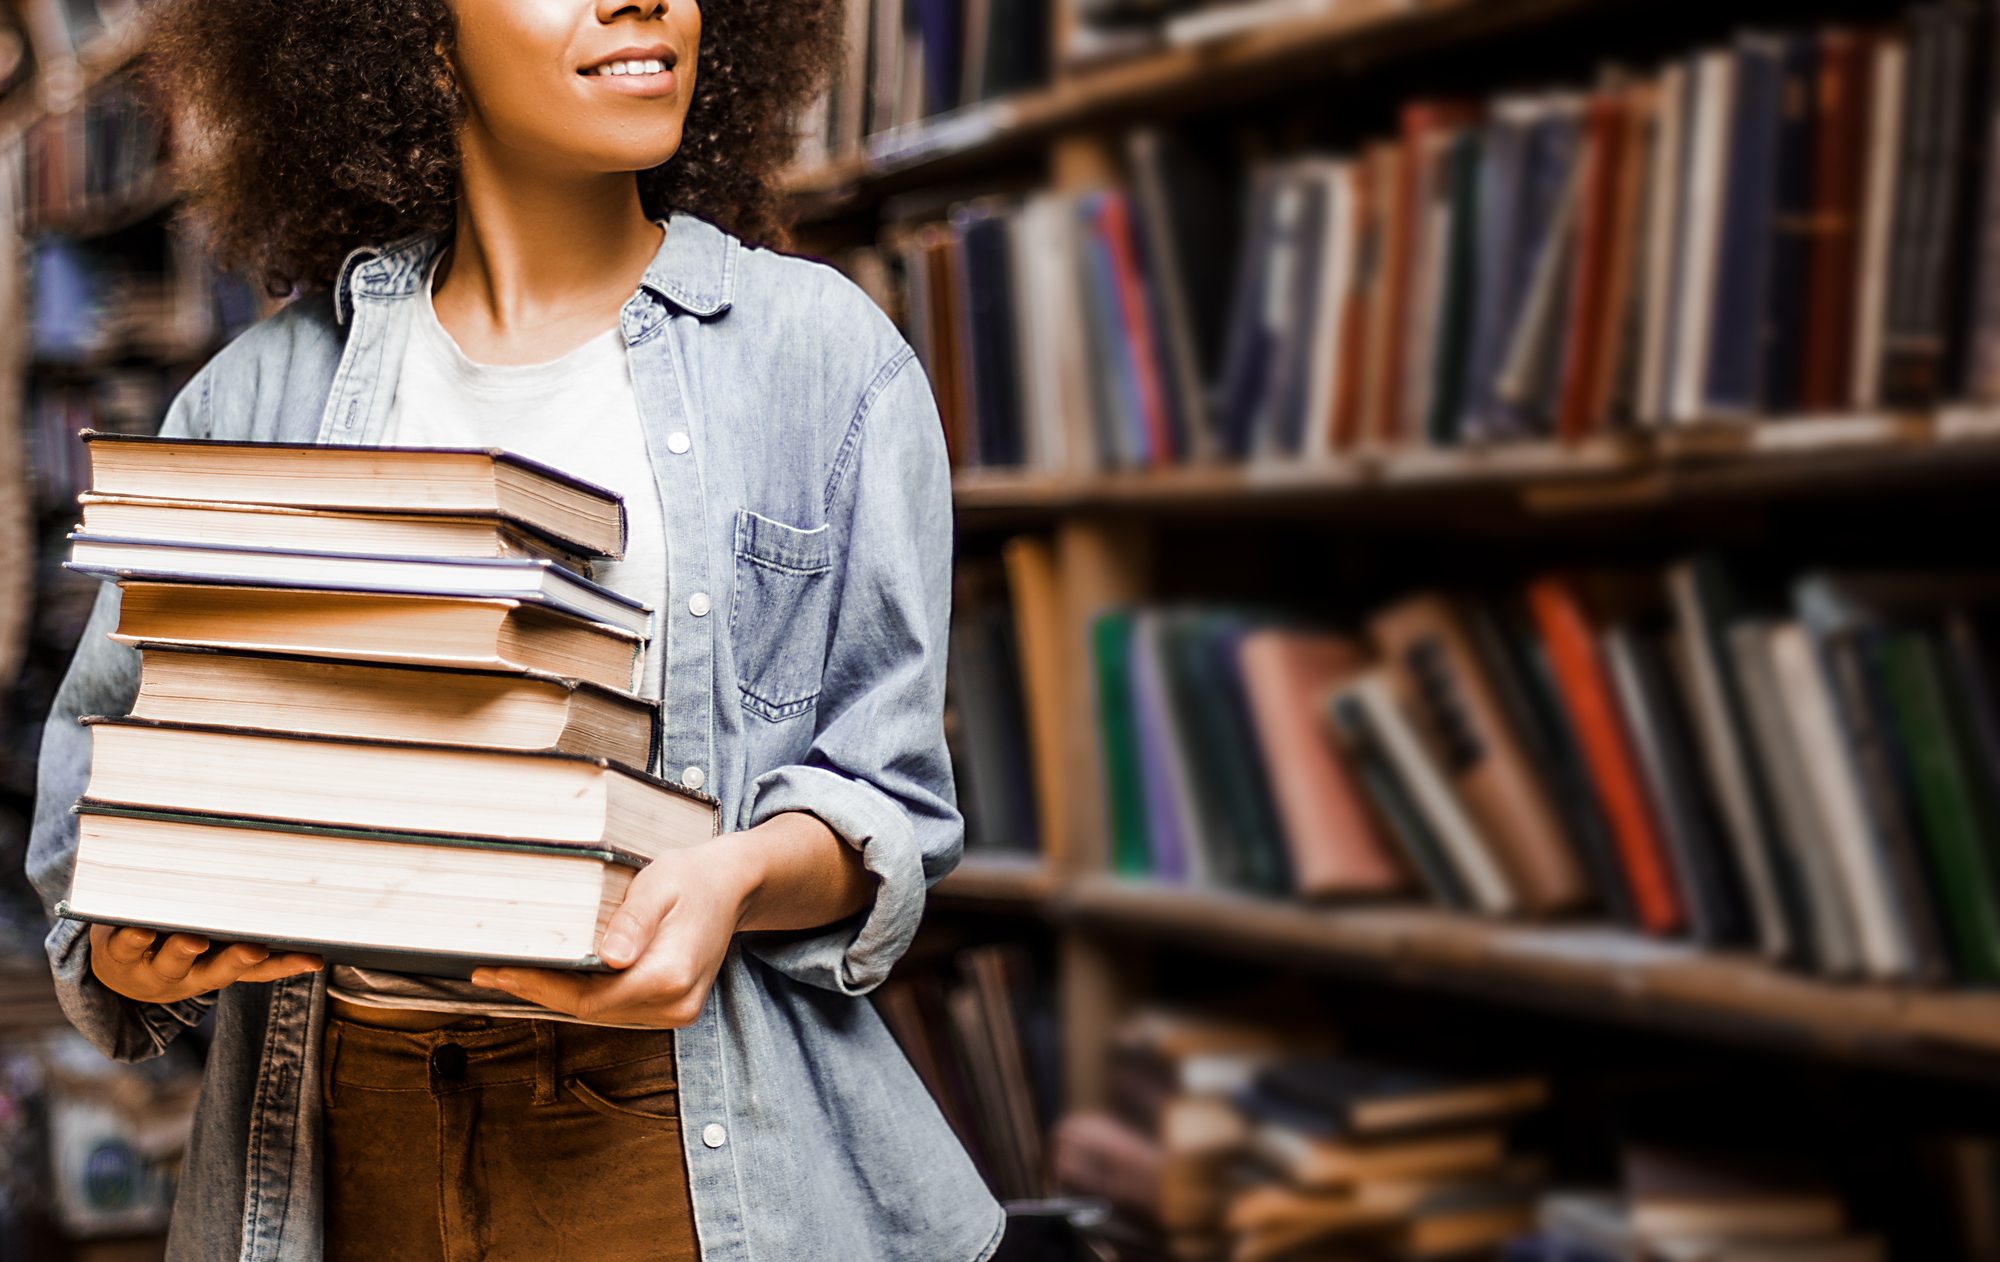 Don’t Toss Those Old Books. Here’s 14 Responsible Ways to Get Rid of Them